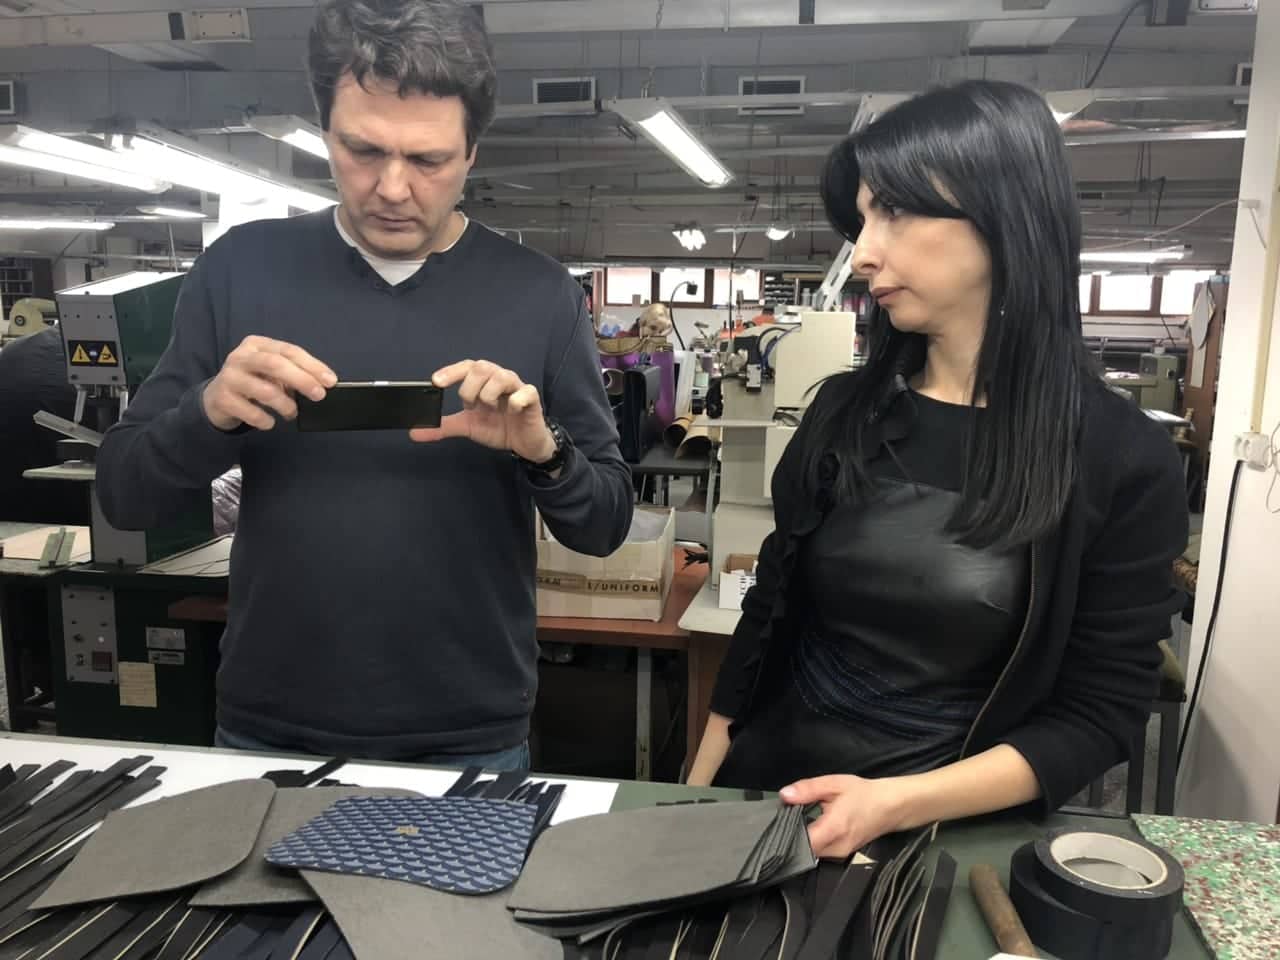 New export orders with the support of Business Armenia: Leather items will be exported to EU, Asia and Russia